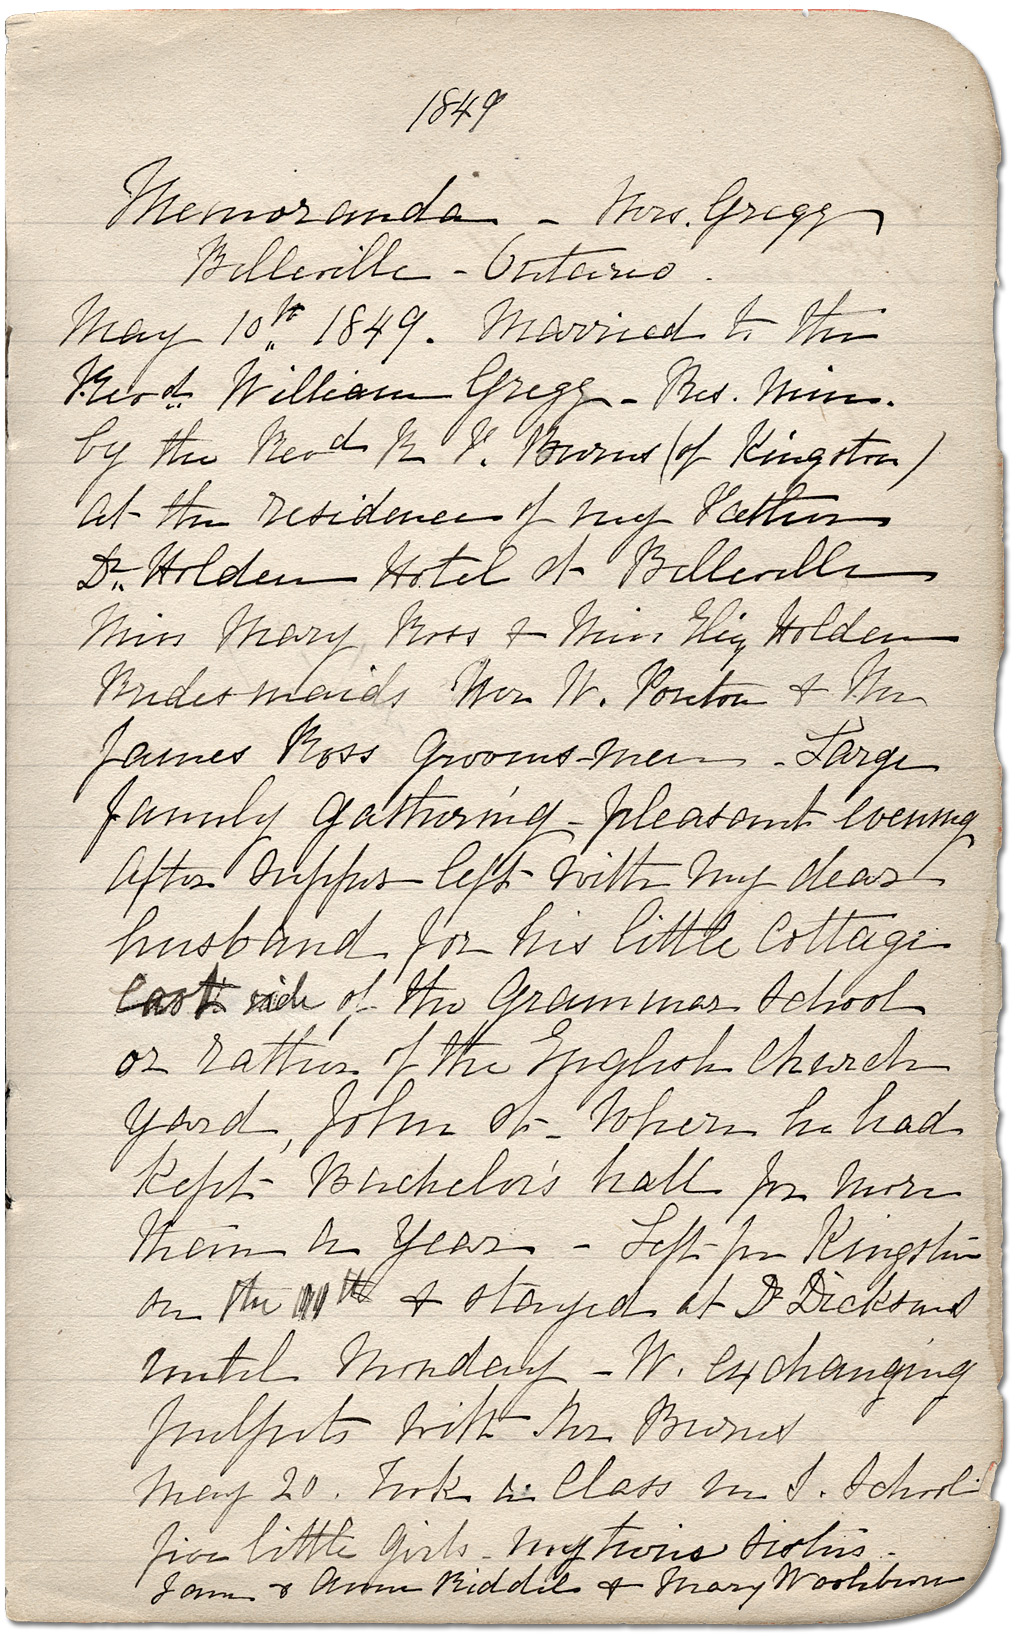 Page from Pheobe Gregg's Diary, 1849